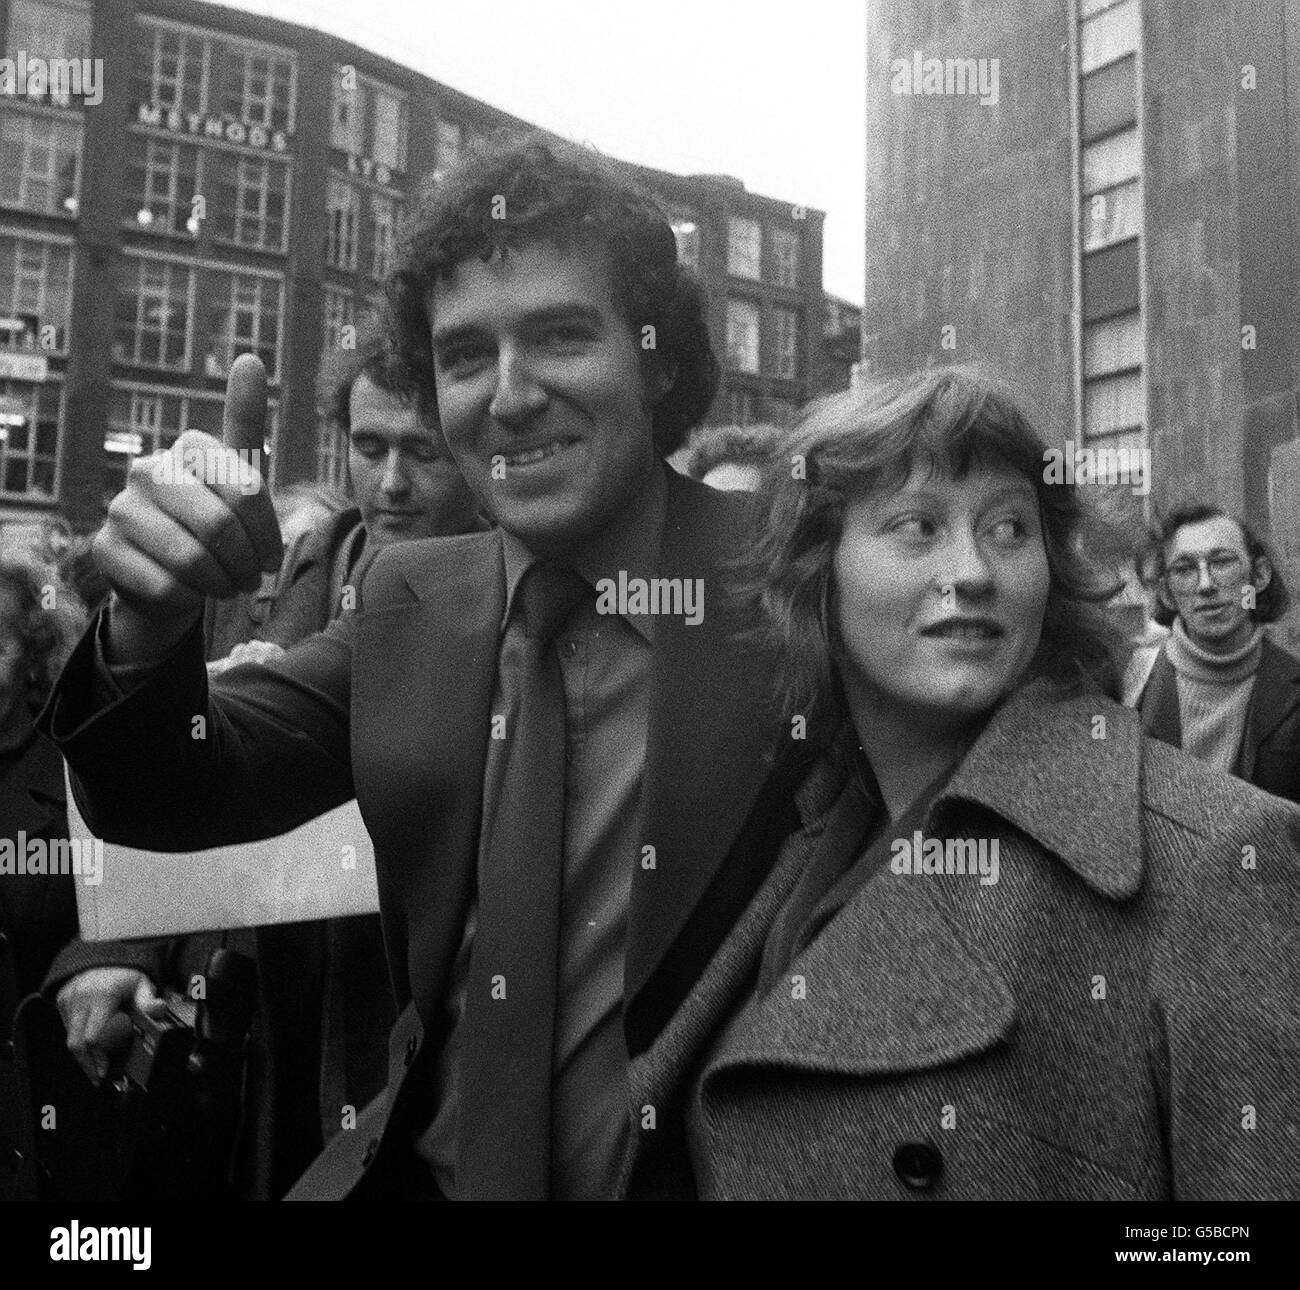 Young Liberals' leader Peter Hain, with his wife Patricia, in London, as he shows his approval of the jury's verdict after his trial at the Old Bailey. Hain, who was charged with stealing 490 from a bank, was found not guilty. Stock Photo